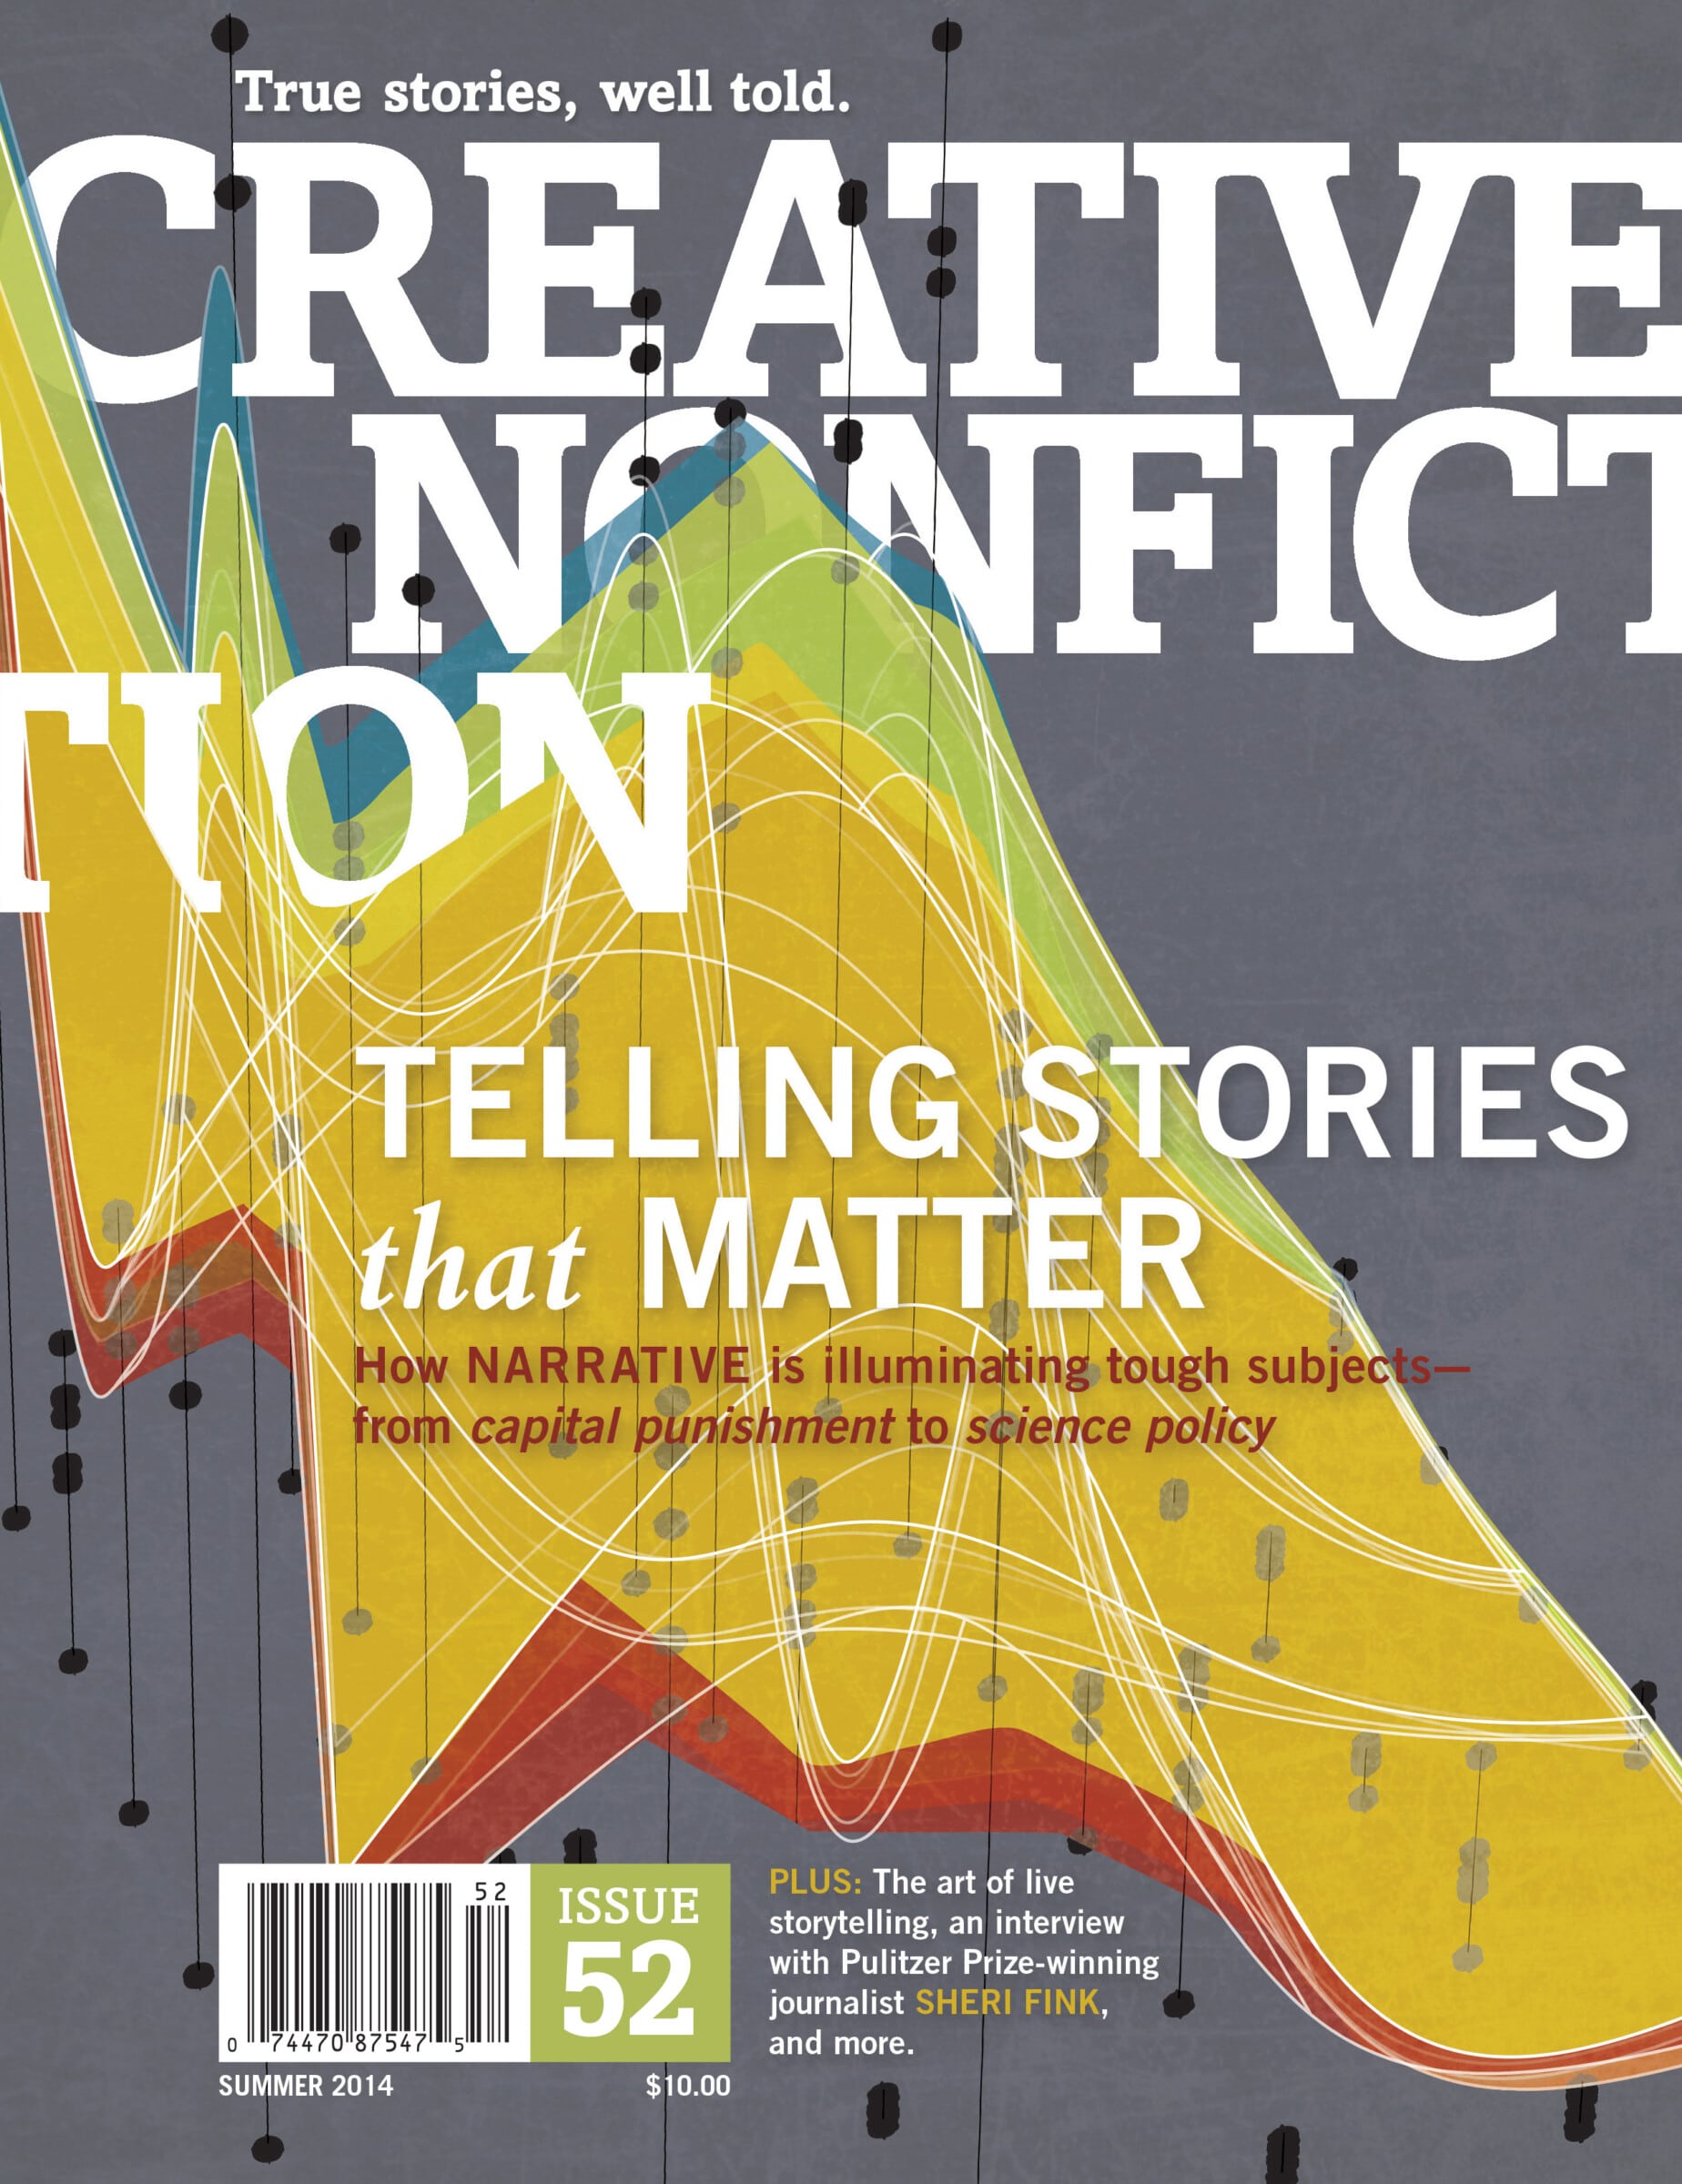 extensive research in creative nonfiction